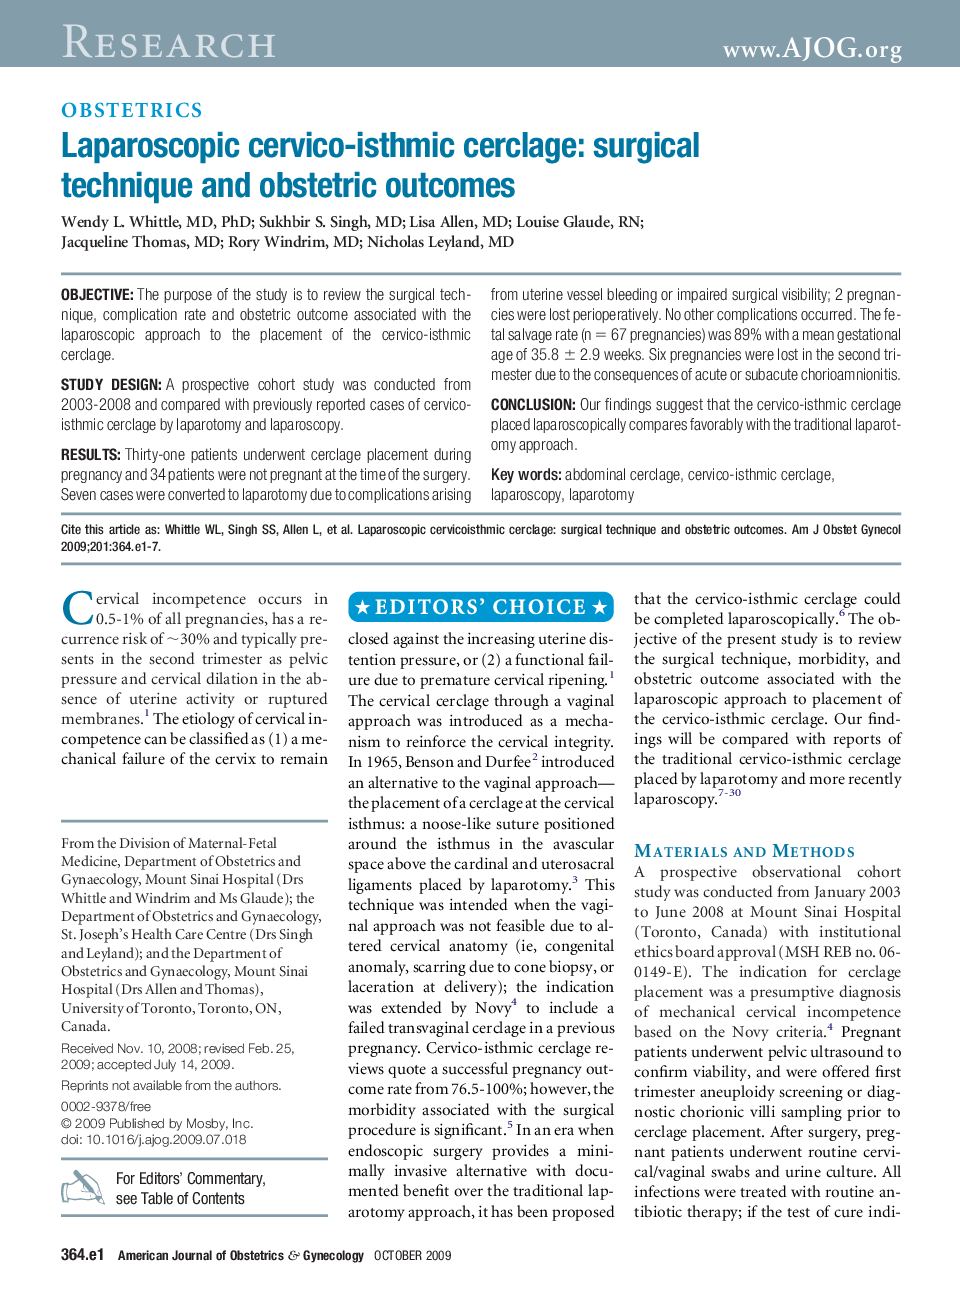 Laparoscopic cervico-isthmic cerclage: surgical technique and obstetric outcomes